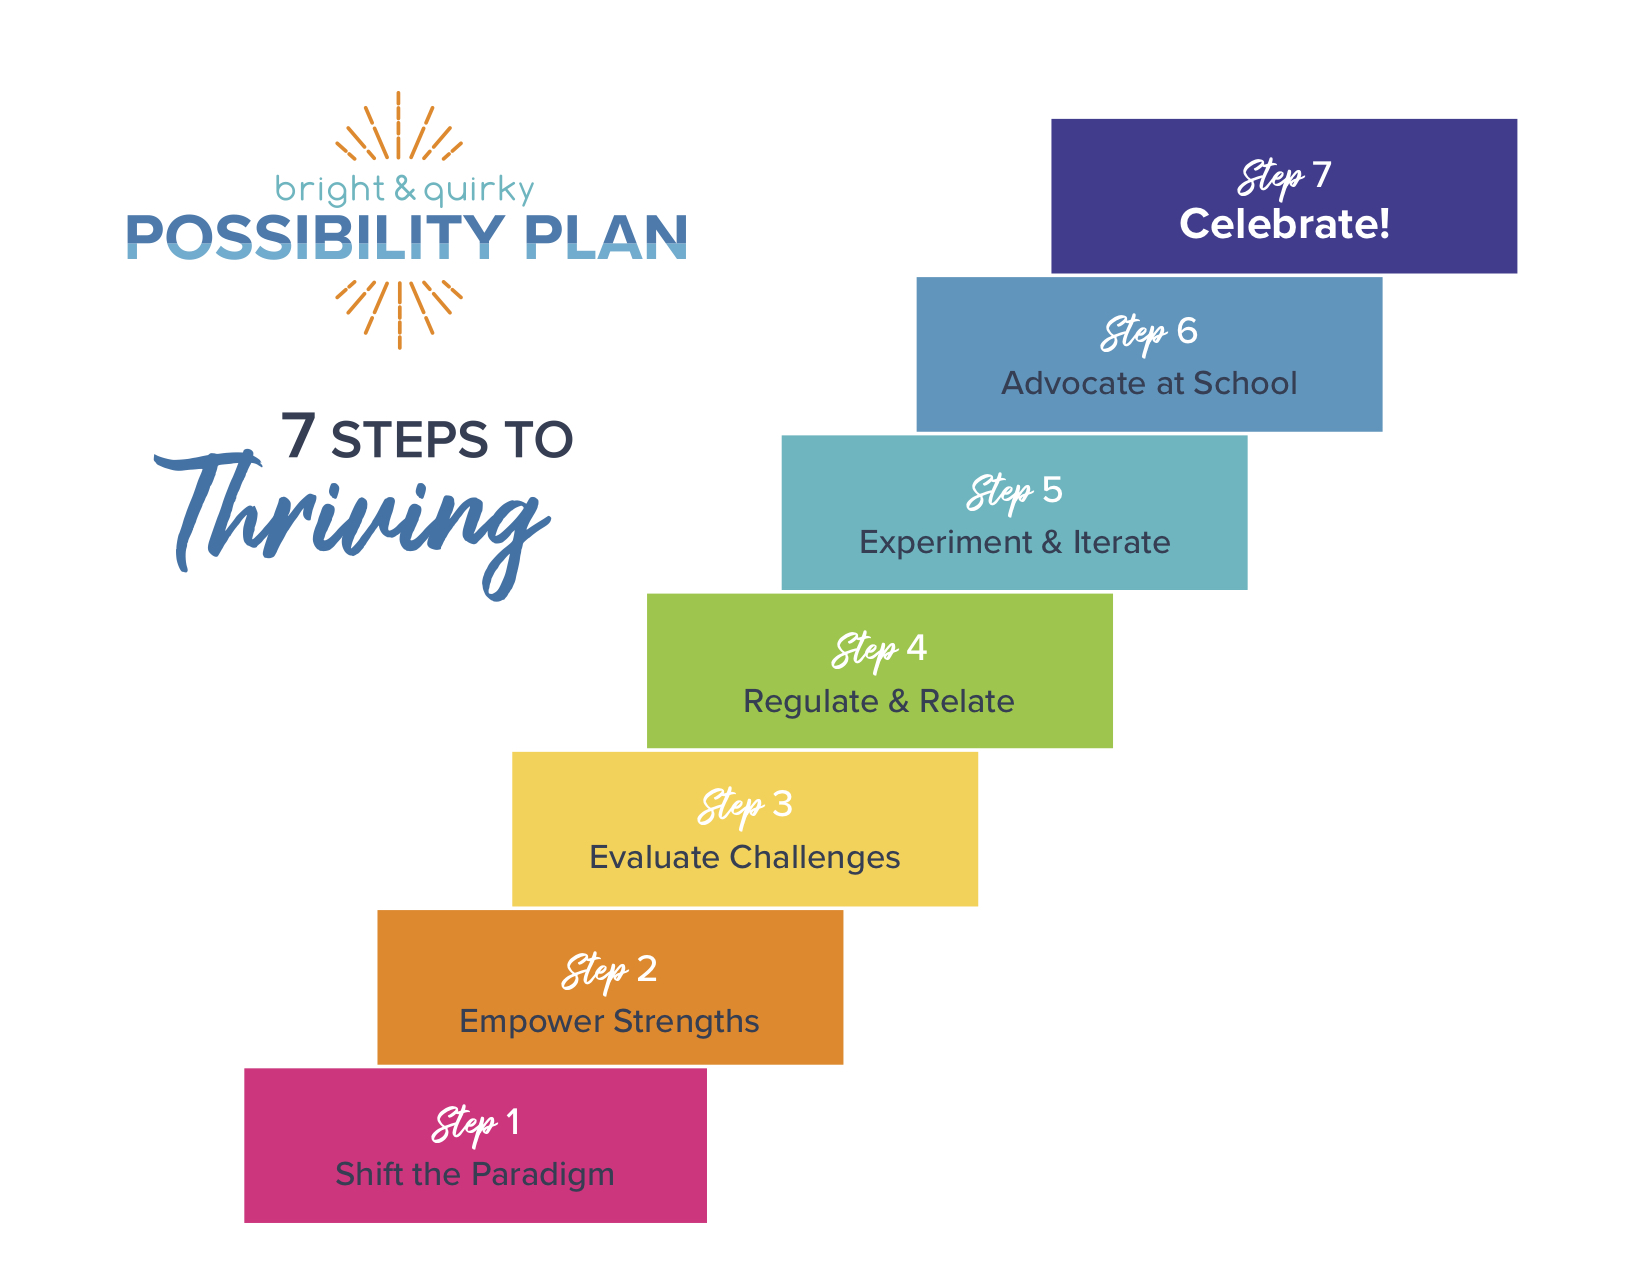 7 steps to thriving_infographic_2